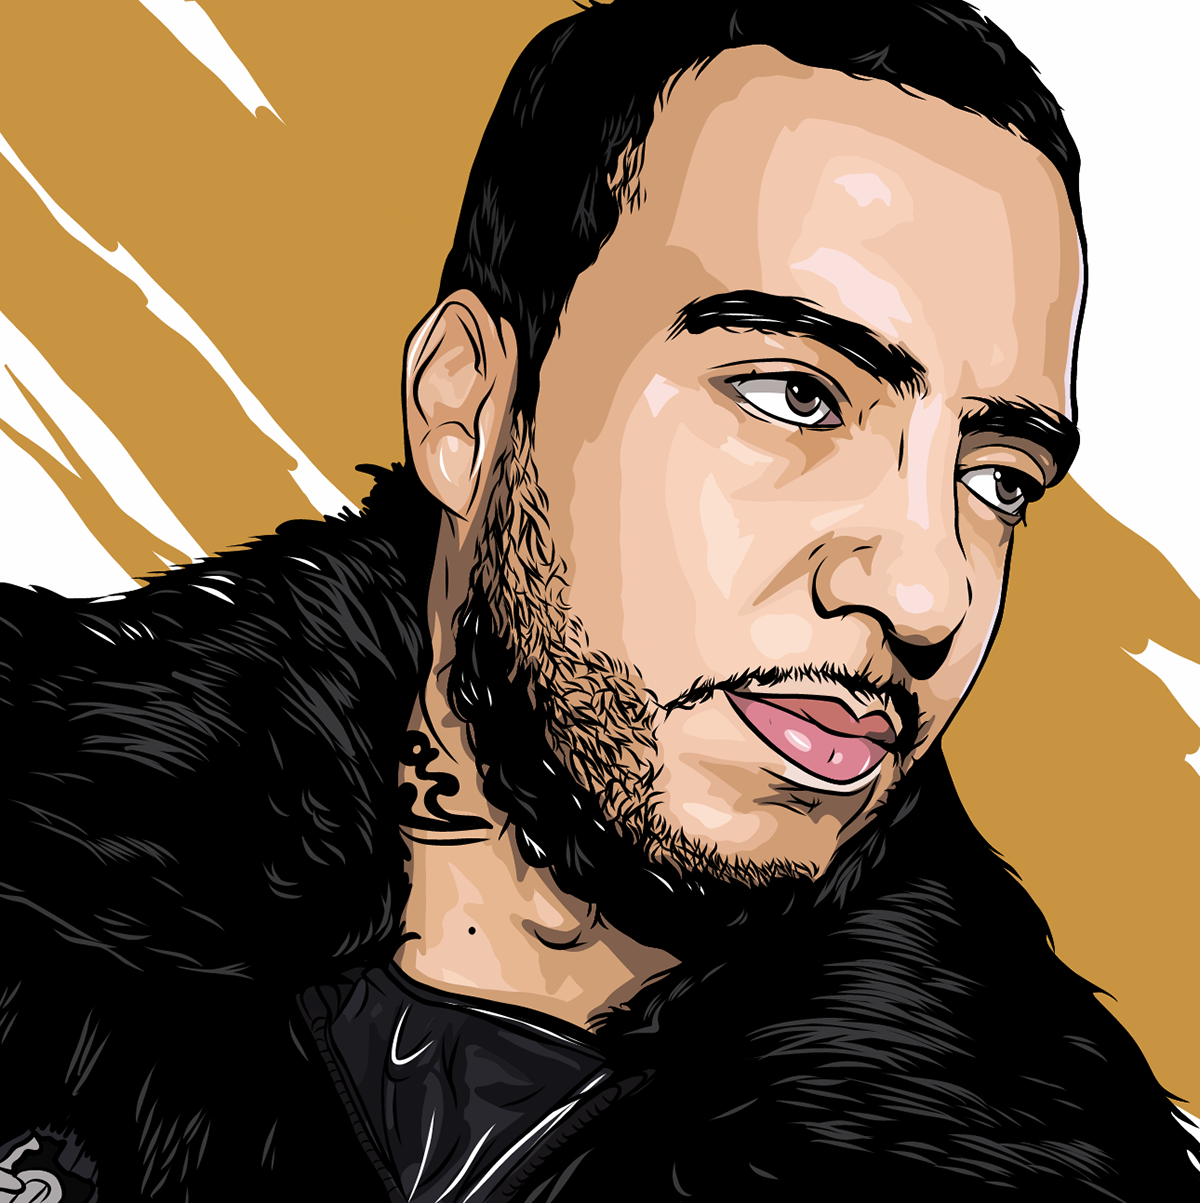 ciroc French Montana frenchmontana coke cokeboys vanilla hiphop unforgetable cool Urban trendy swag crazy dope silly funny graphics design ILLUSTRATION  fresh supreme beard Diddy Pdiddy brand logo